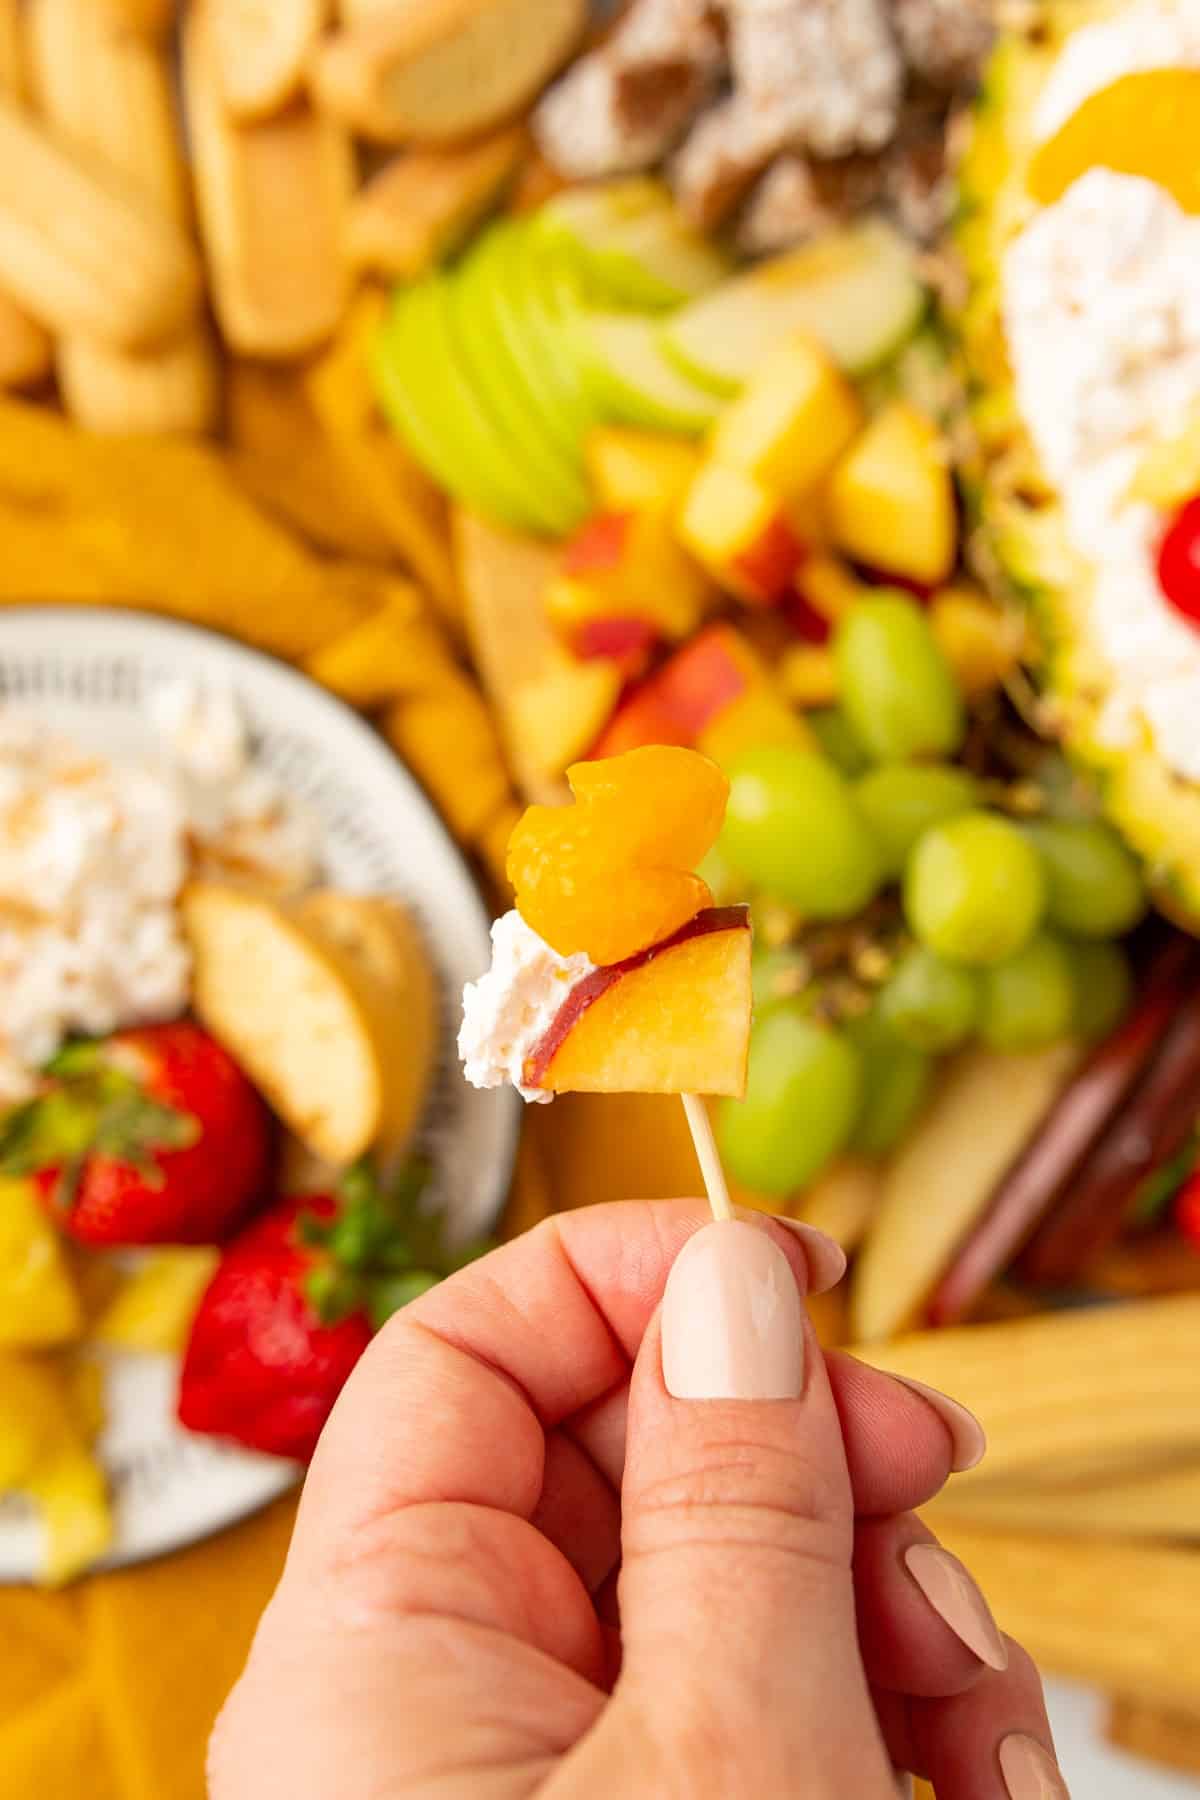 Holding fruit and dip on a toothpick. 